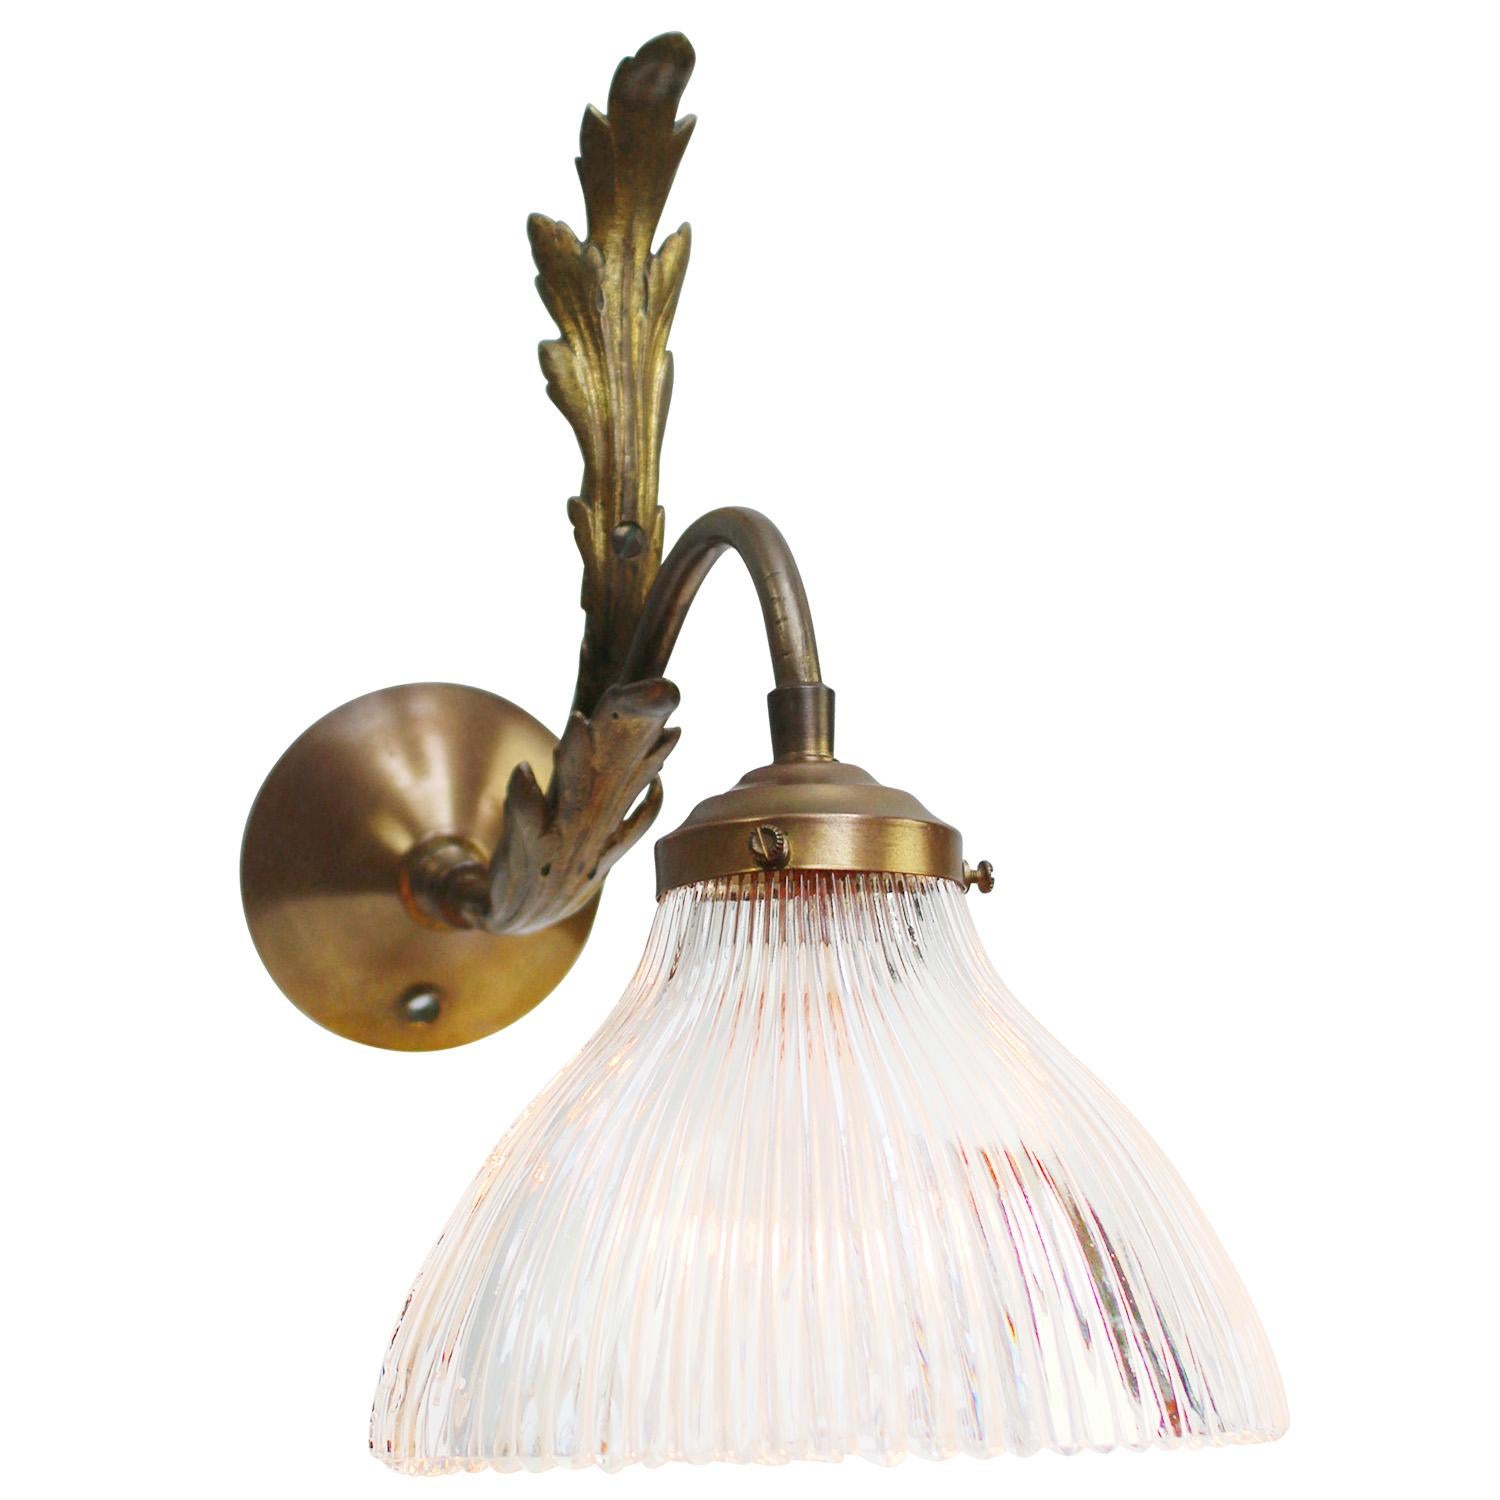 French wall lamp
Holophane clear glass shade
Brass wall piece and arm

diameter brass wall mount: 9,5 cm / 3.74”

Weight: 1.30 kg / 2.9 lb

Priced per individual item. All lamps have been made suitable by international standards for incandescent